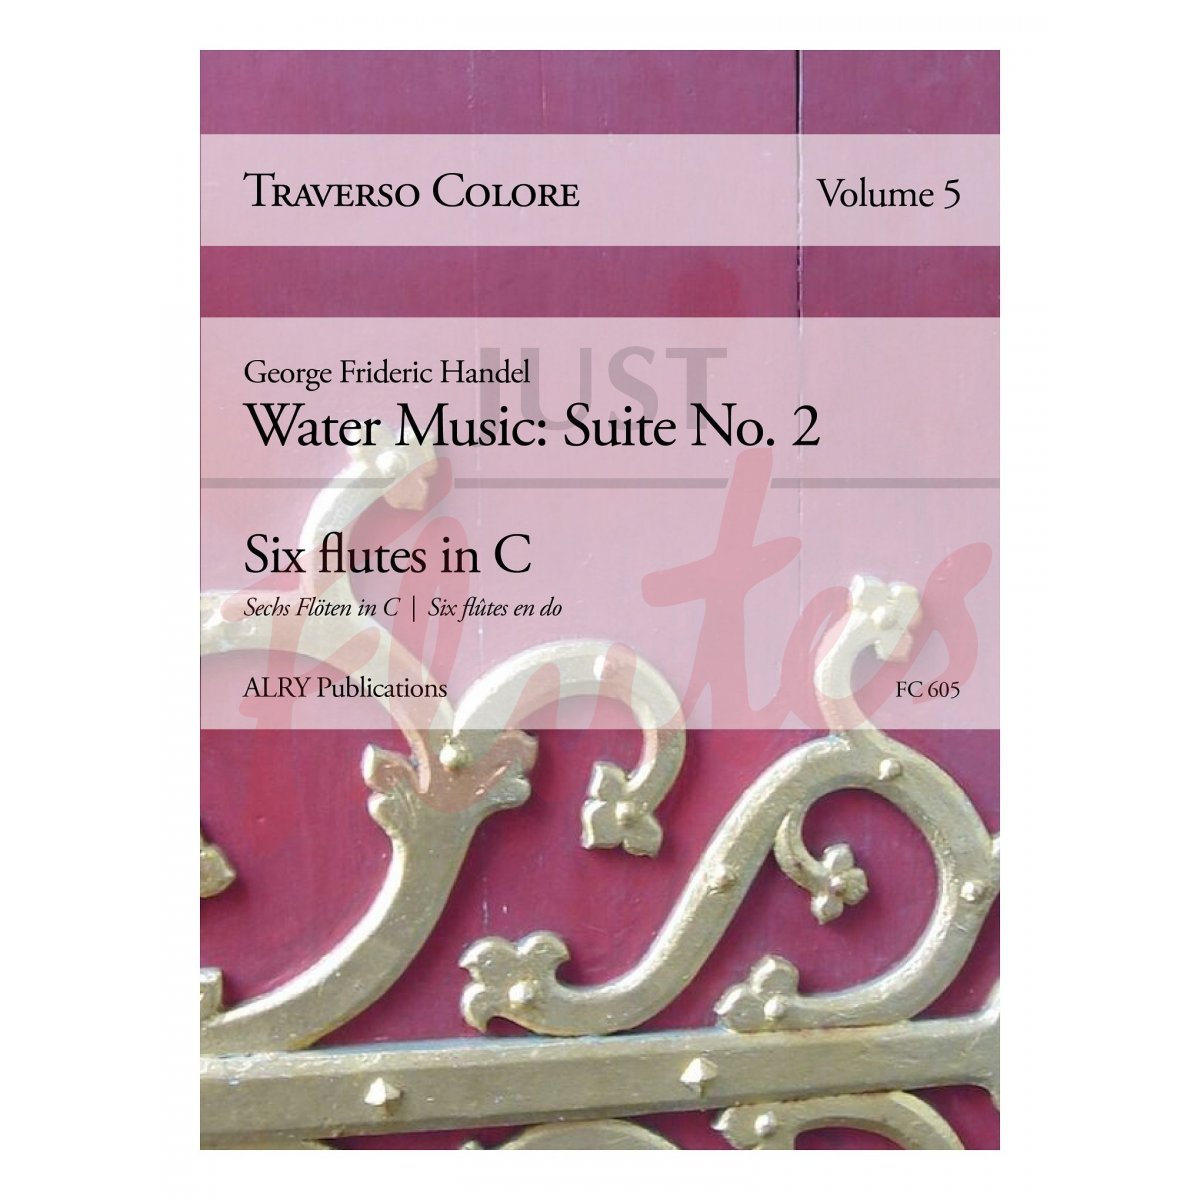 Water Music Suite No. 2 for Six C flutes